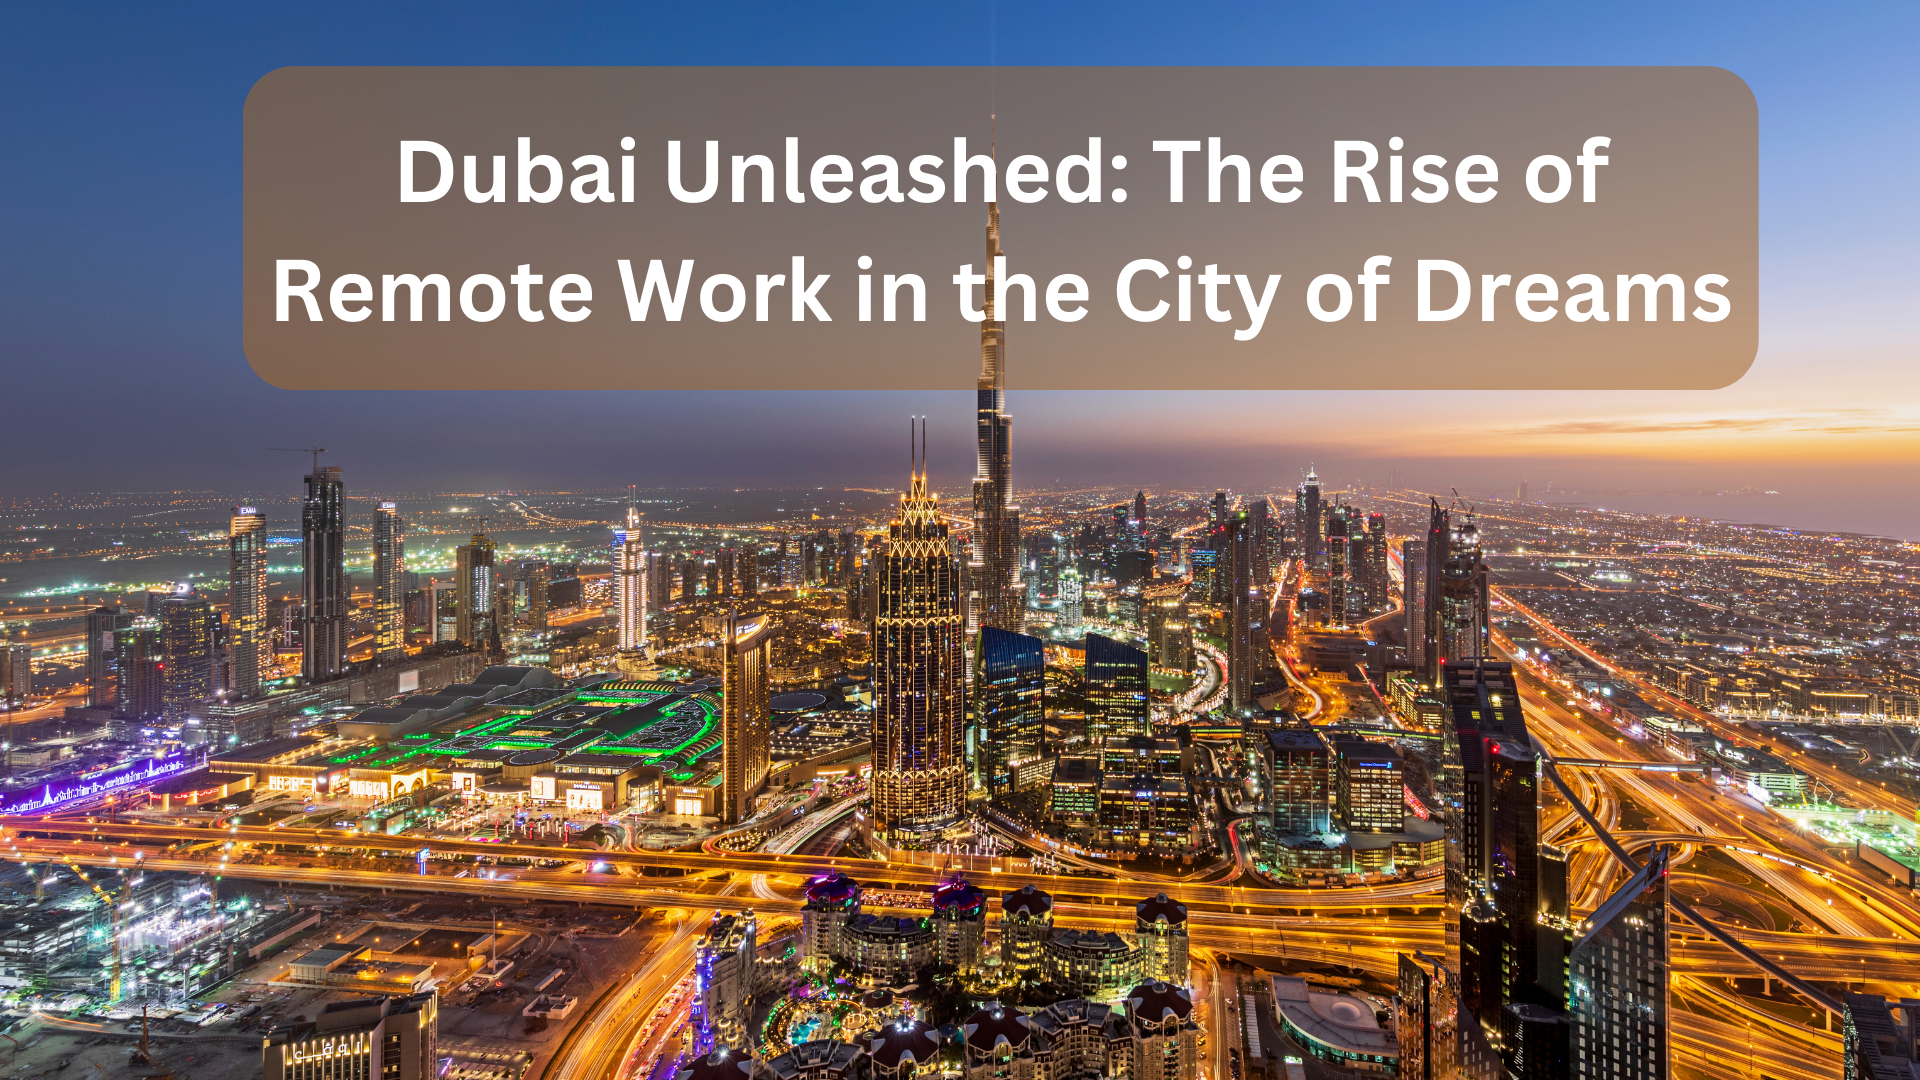 Dubai Unleashed: The Rise of Remote Work in the City of Dreams"